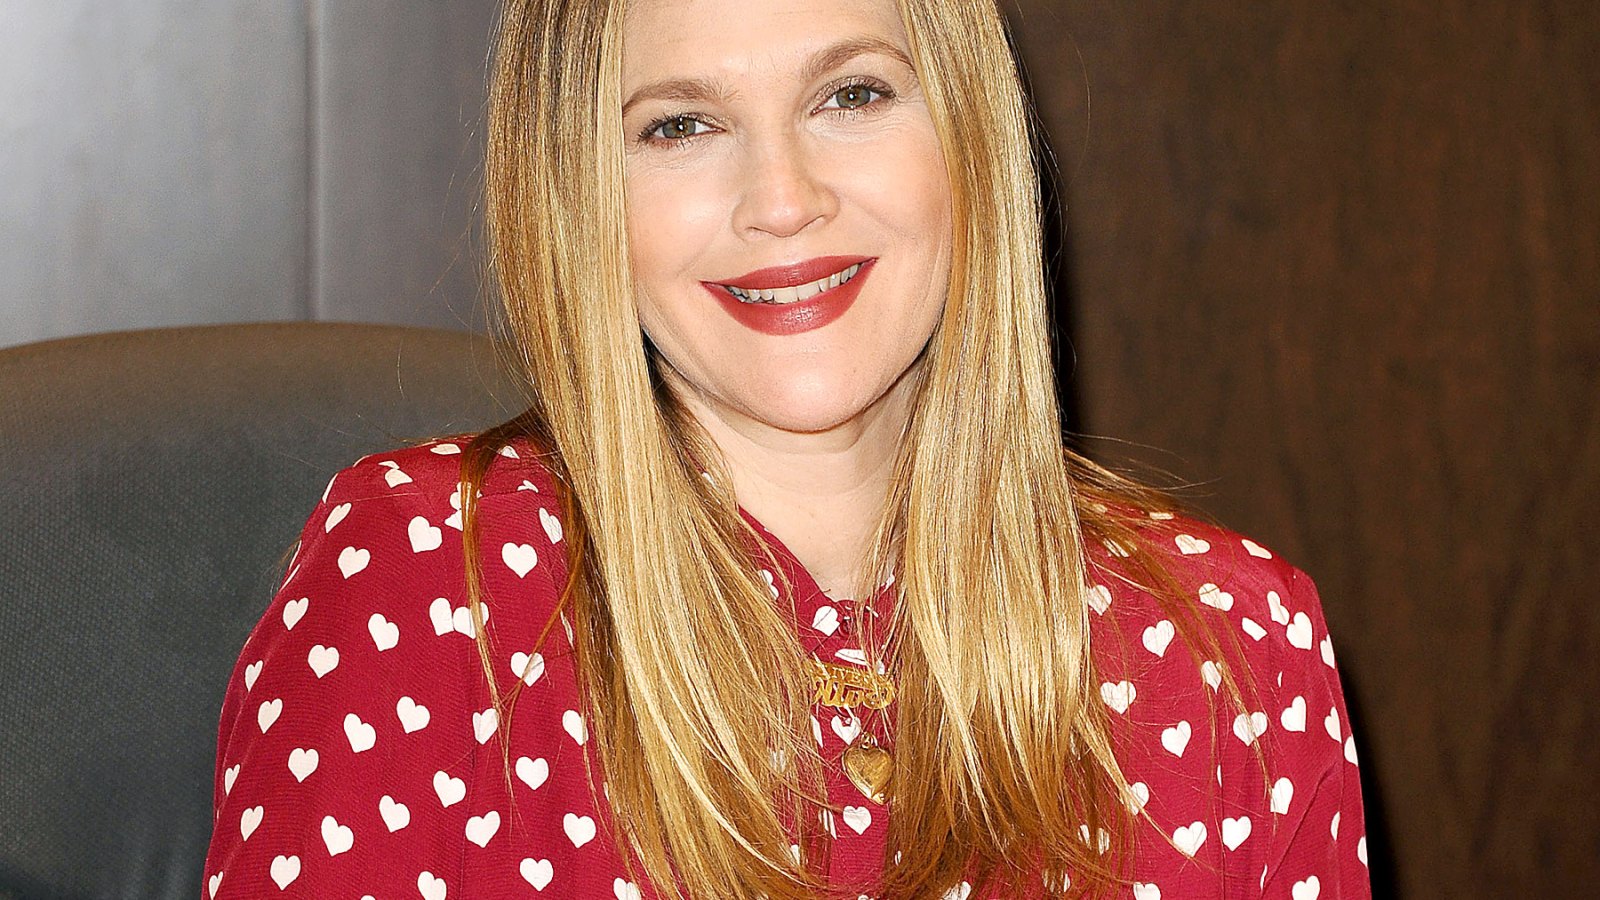 Drew Barrymore signs copies of her new book "Find It In Everything"